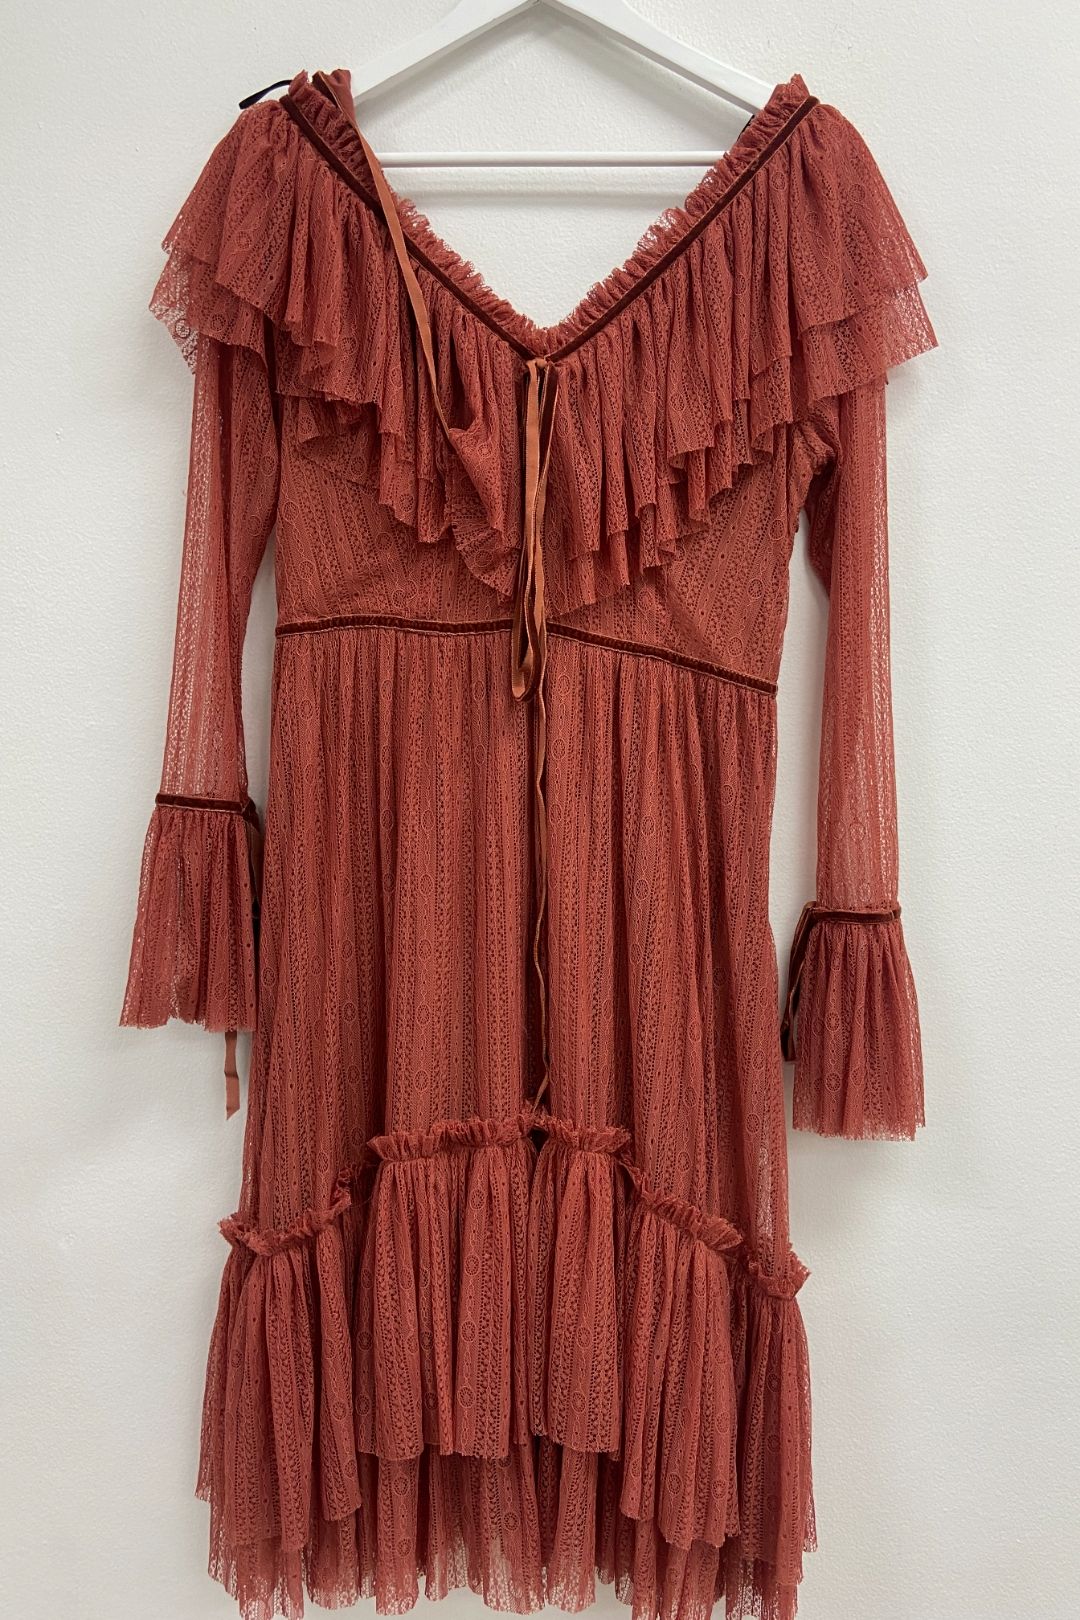 Clementine Boho Lace Dress in Rust